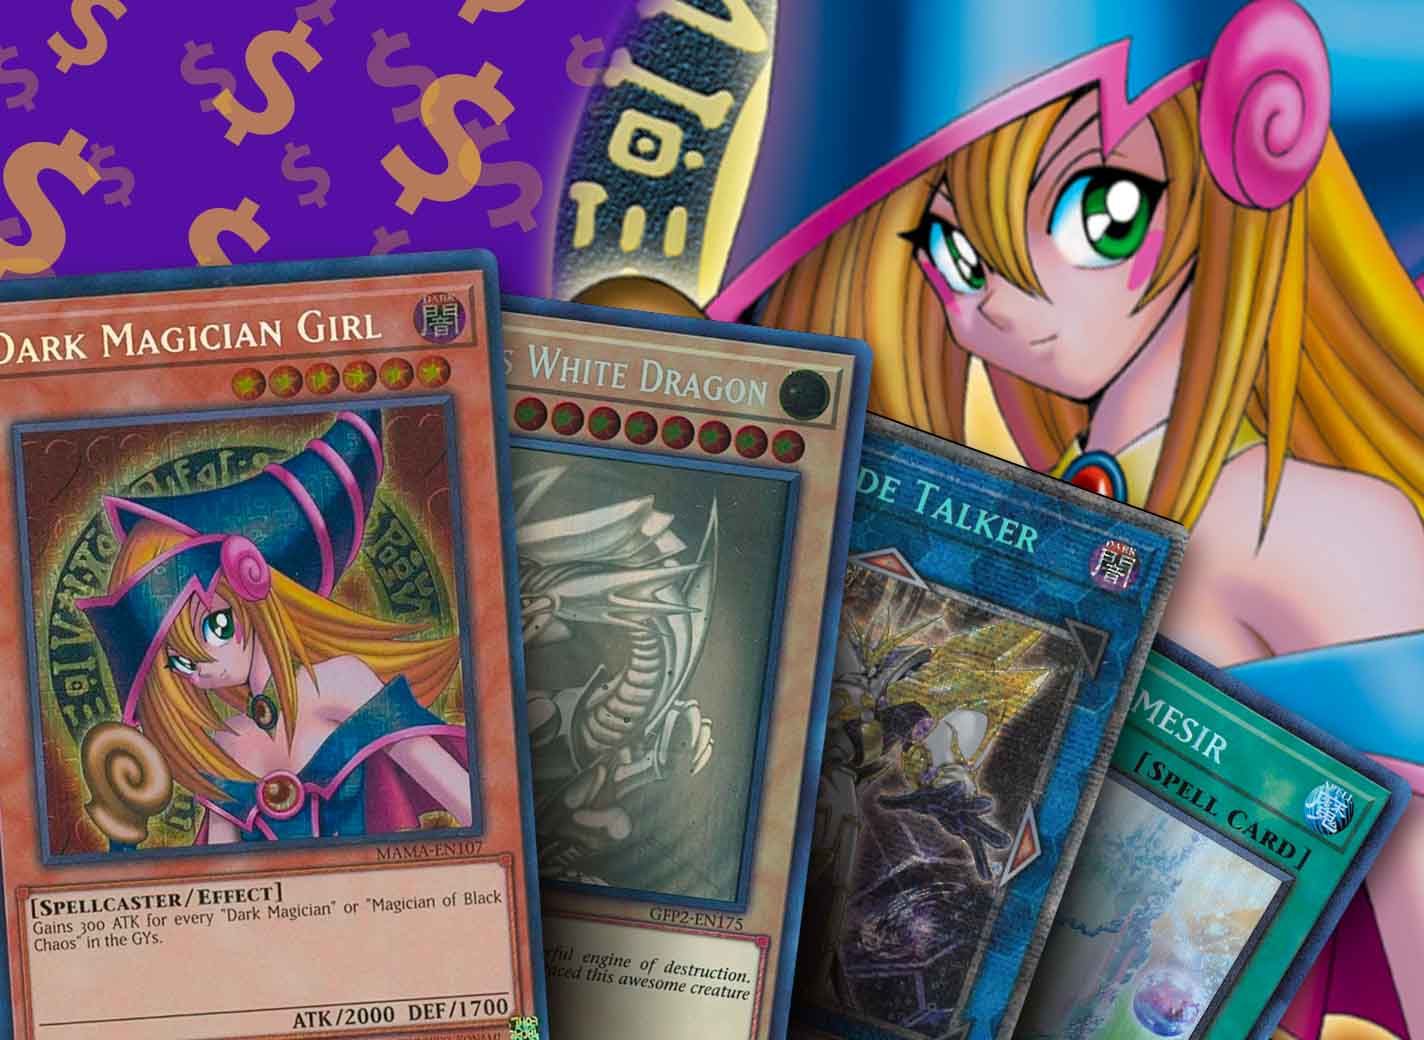 The 10 Most Expensive Yu-Gi-oh! Cards of All Time